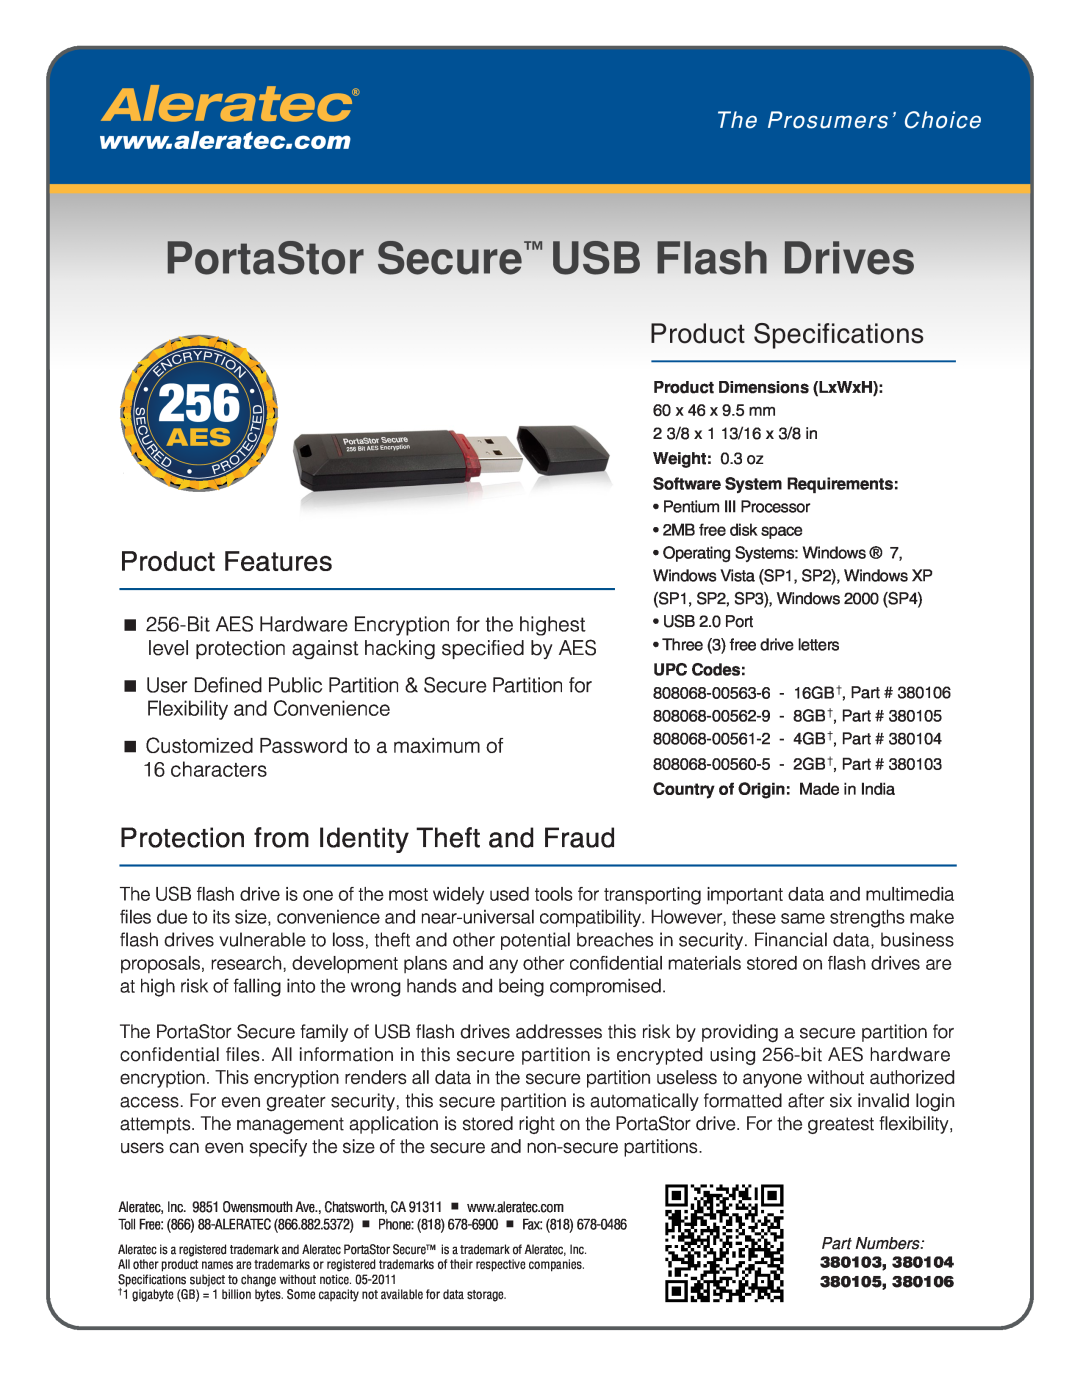 Aleratec 380104 dimensions 256 E, PortaStor Secure USB Flash Drives, Product Features, Product Specifications, characters 